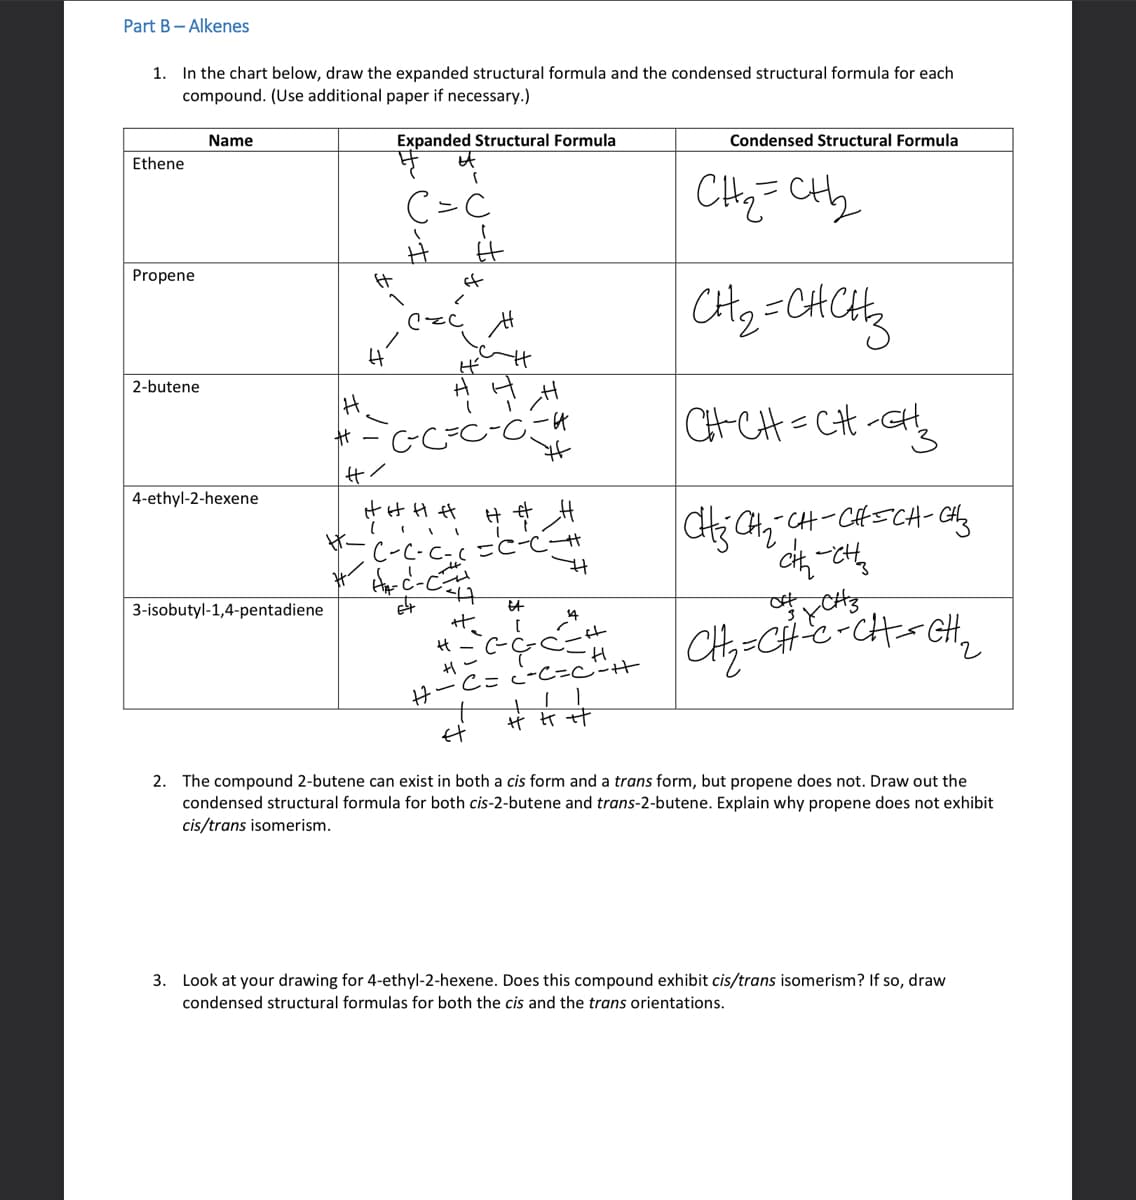 Part B - Alkenes
1. In the chart below, draw the expanded structural formula and the condensed structural formula for each
compound. (Use additional paper if necessary.)
Expanded Structural Formula
Ethene
Propene
2-butene
Name
4-ethyl-2-hexene
3-isobutyl-1,4-pentadiene
H
#
H
H
(
C=C
#/
H
of
2
H
-C²-C²=C
H
É
H H H H
##__#
•C-C-C-( = C-C +
H₁-C²-C
64
47
Et
#₂!
H-² C-C-C
H-
#t
14
ift
-H
C = C-C=C²-H
11
艹艹艹
Condensed Structural Formula
CH₂=CH₂2₂
CH₂=CHCH₂
CH-CH=CH-CH₂
CH₂ CH₂=CH-CH=CH-CH₂
cih ett
XCH3
CH₂=CH-C-CH==CH₂₂
2. The compound 2-butene can exist in both a cis form and a trans form, but propene does not. Draw out the
condensed structural formula for both cis-2-butene and trans-2-butene. Explain why propene does not exhibit
cis/trans isomerism.
3. Look at your drawing for 4-ethyl-2-hexene. Does this compound exhibit cis/trans isomerism? If so, draw
condensed structural formulas for both the cis and the trans orientations.